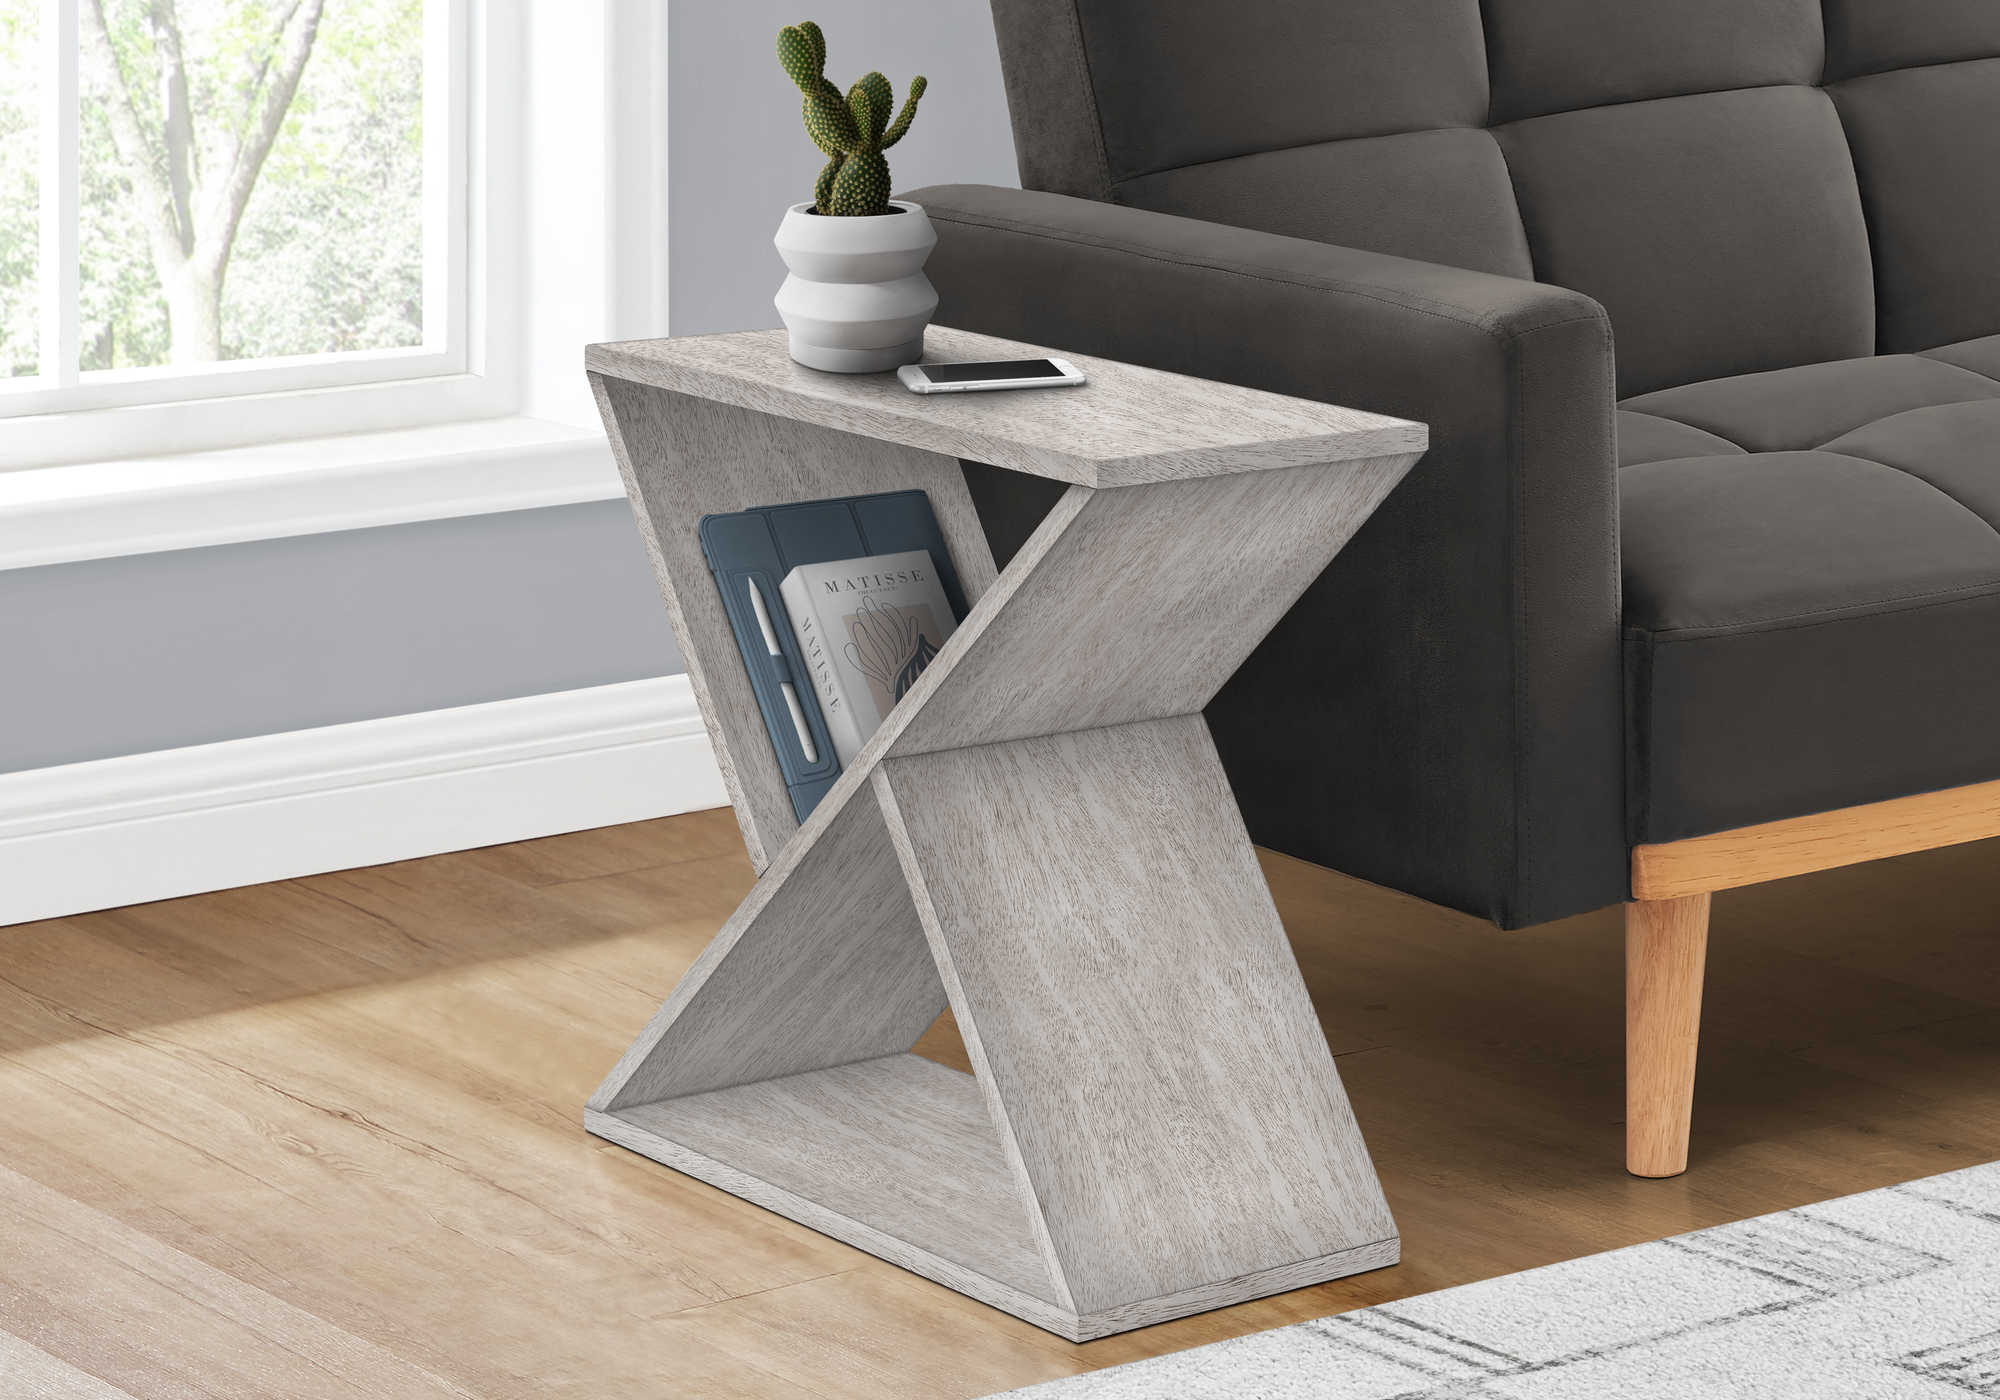 ACCENT TABLE - 24"H / WASHED GREY VENEER END TABLE